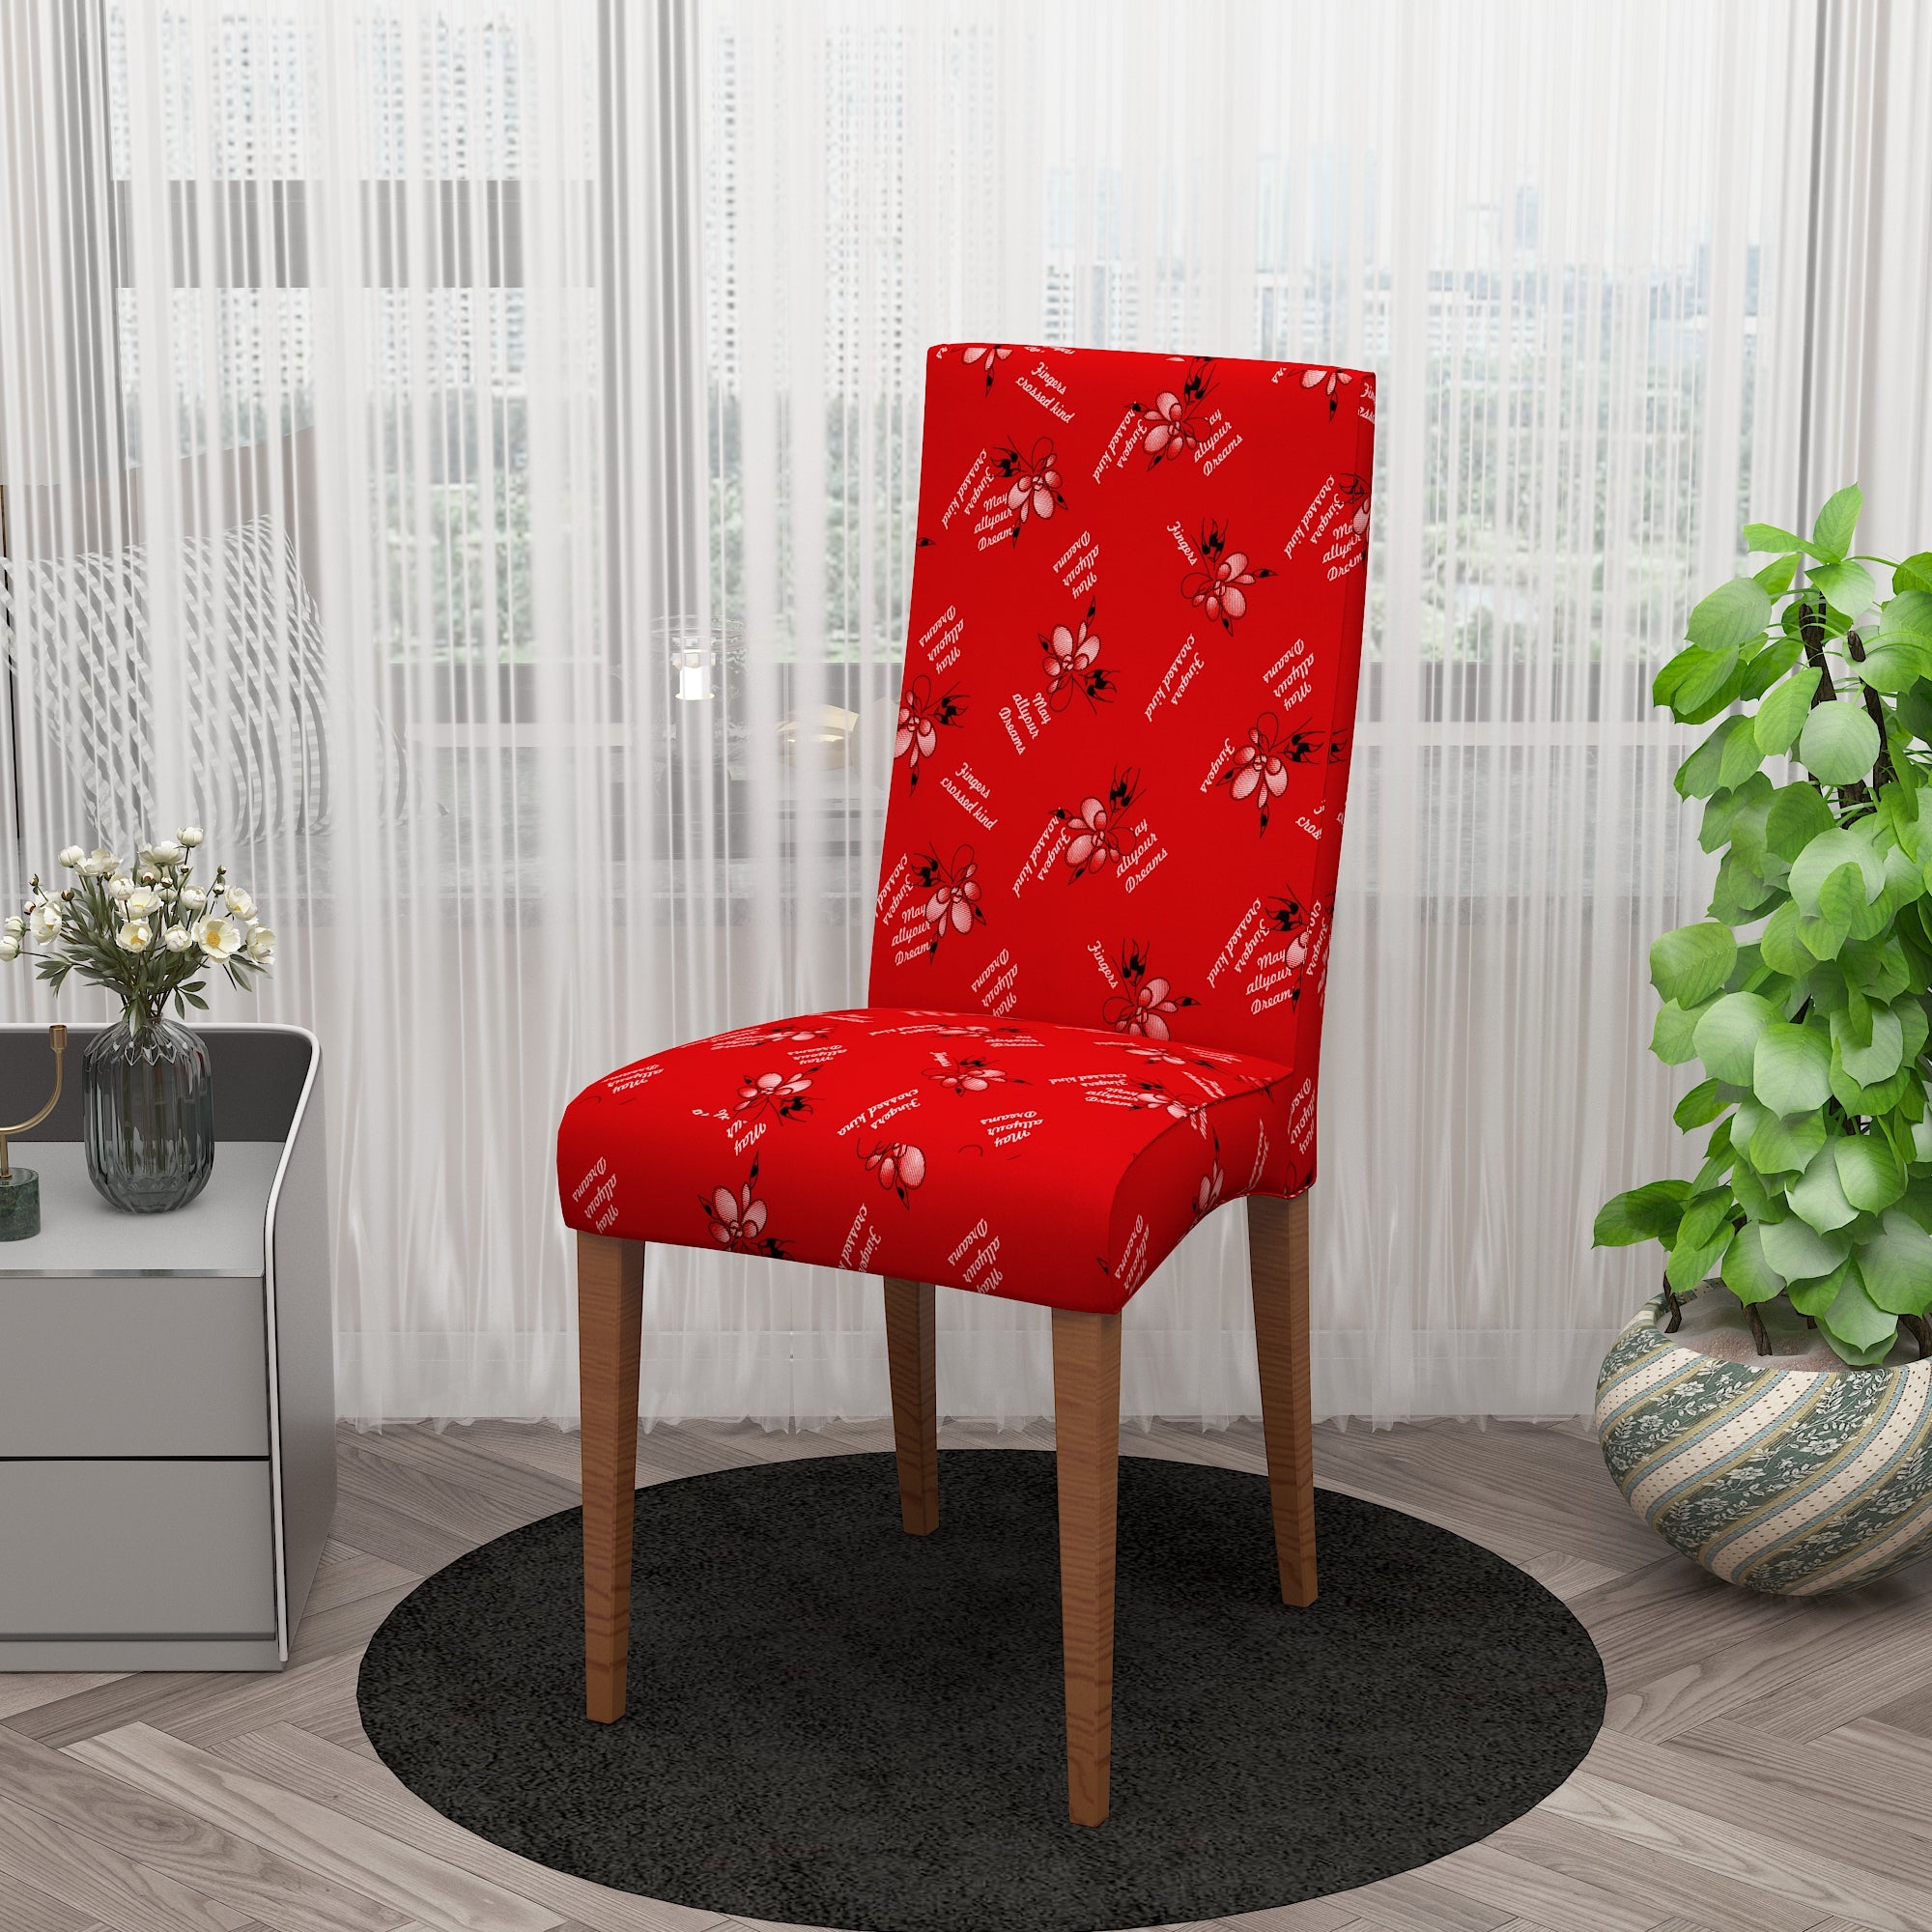 Polyester Spandex Stretchable Printed Chair Cover, MG34